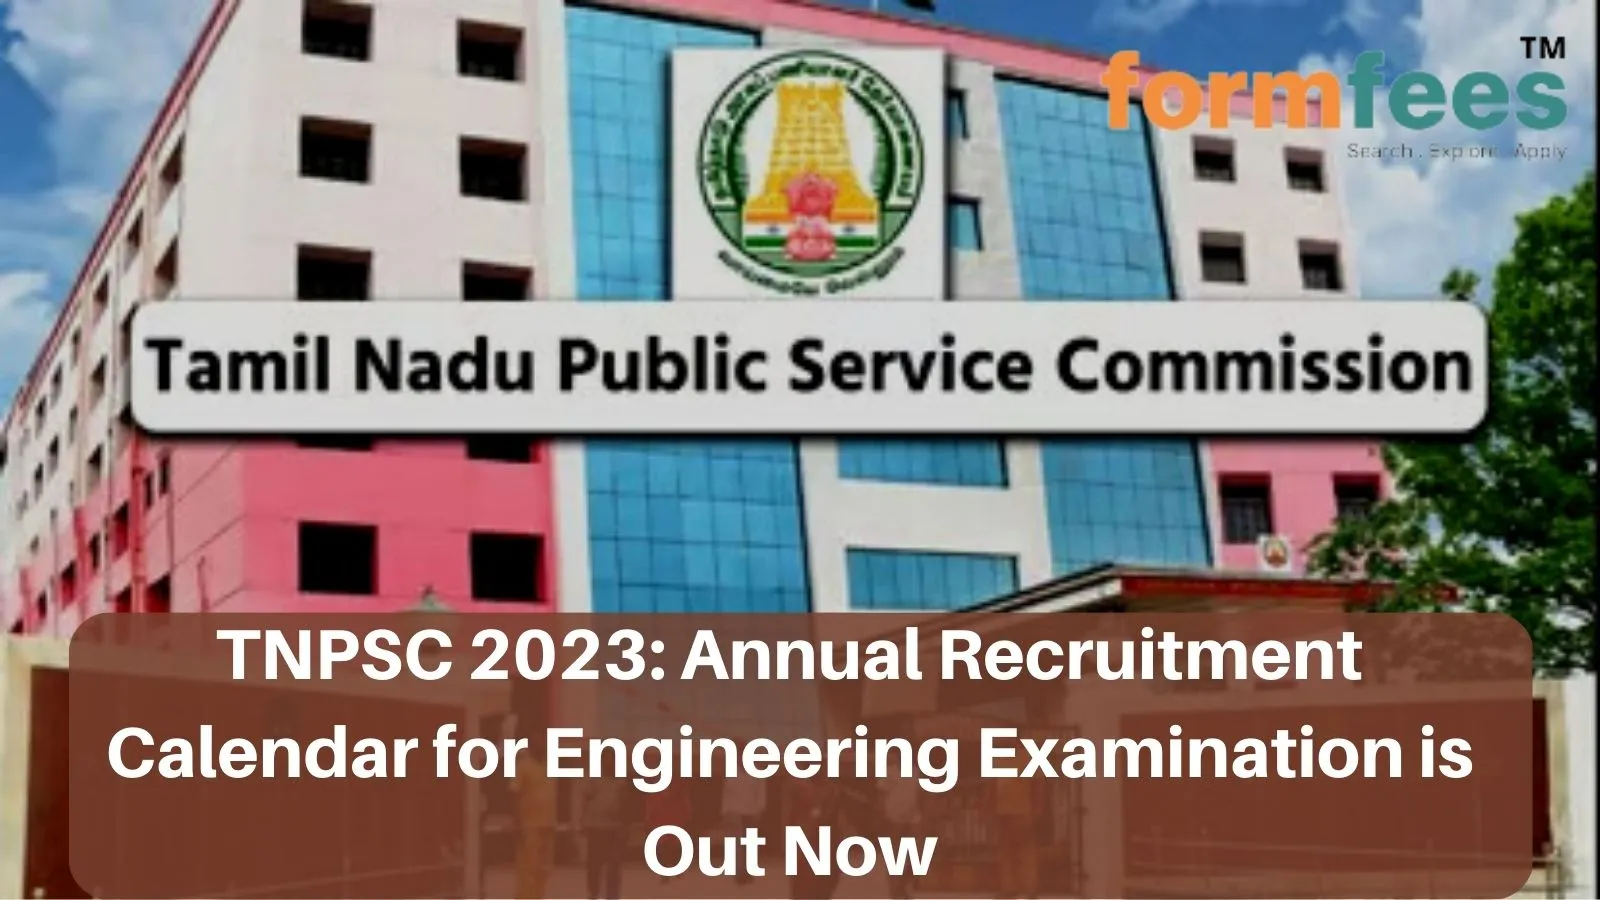 TNPSC 2023: Annual Recruitment Calendar for Engineering Examination is Out Now